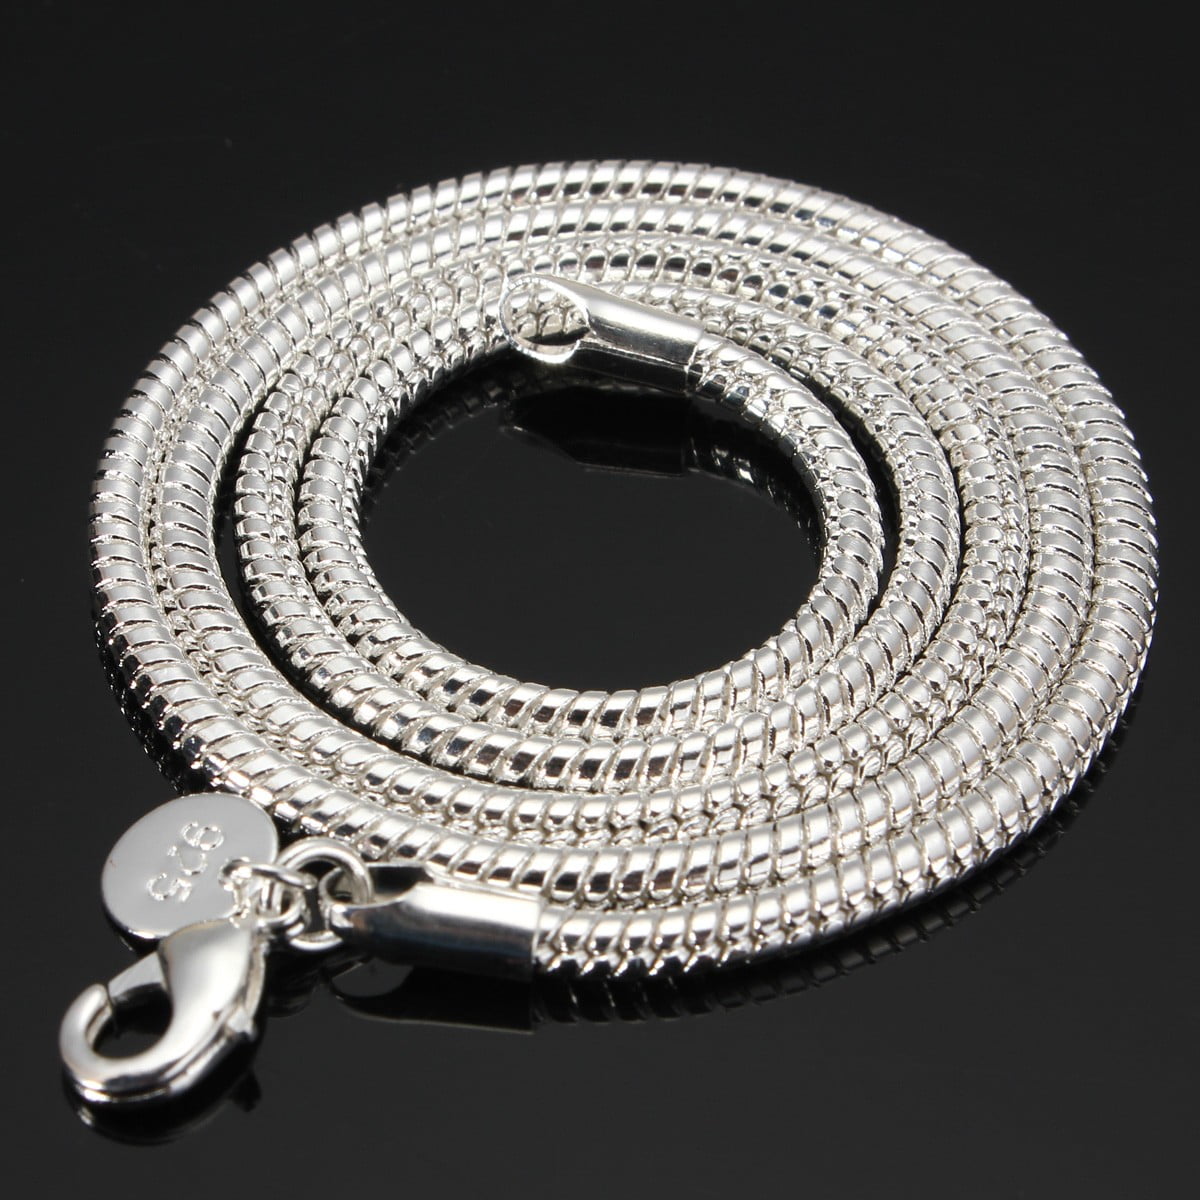 BRITISH HALLMARKED SOLID STERLING SILVER SNAKE CHAIN NECKLACE 20” 3mm Thick 